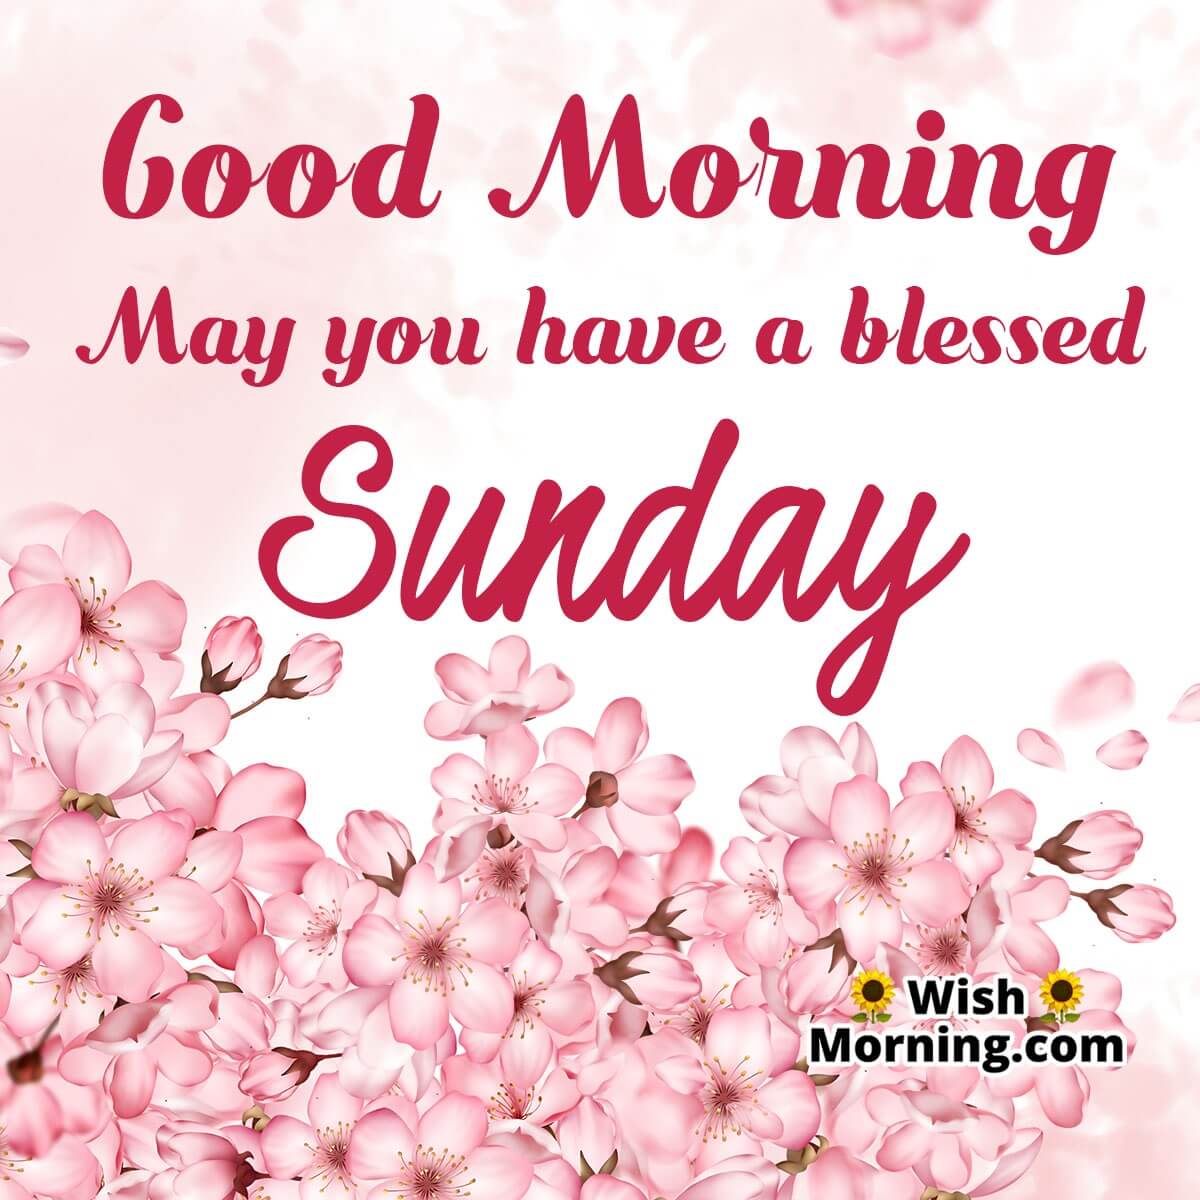 Good Morning May You Have A Blessed Sunday